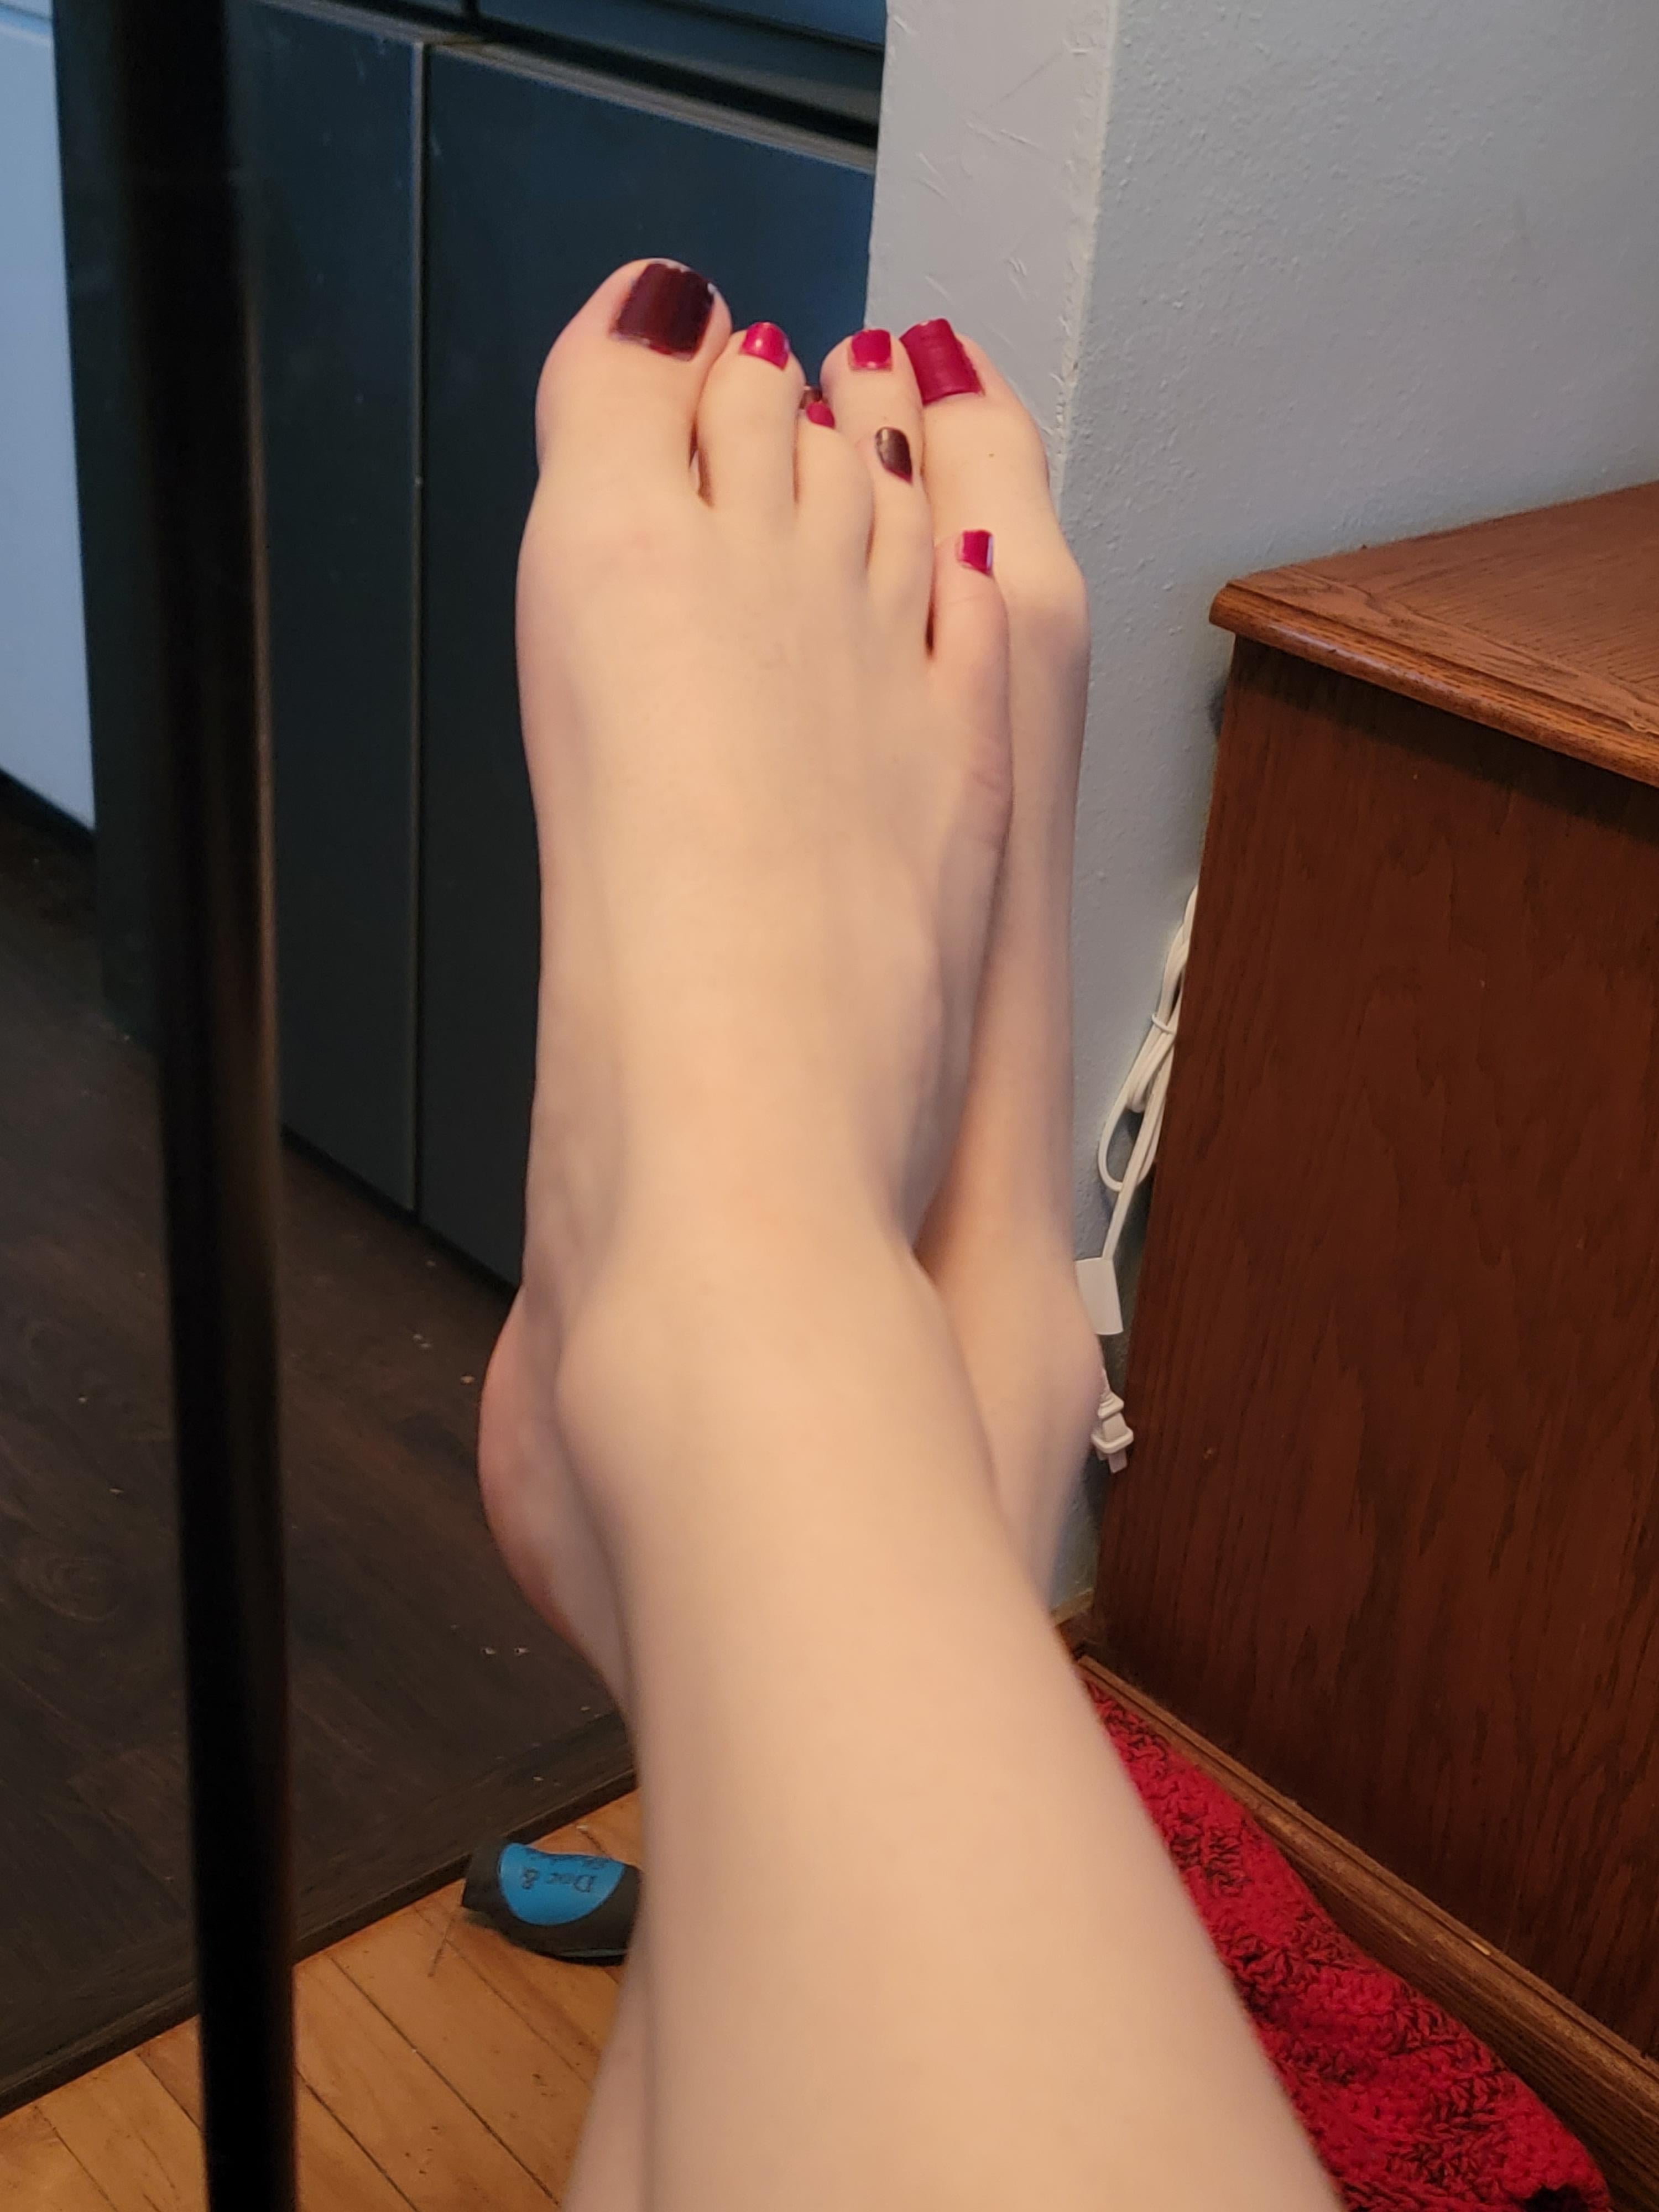 Just some extra classy toes for your night